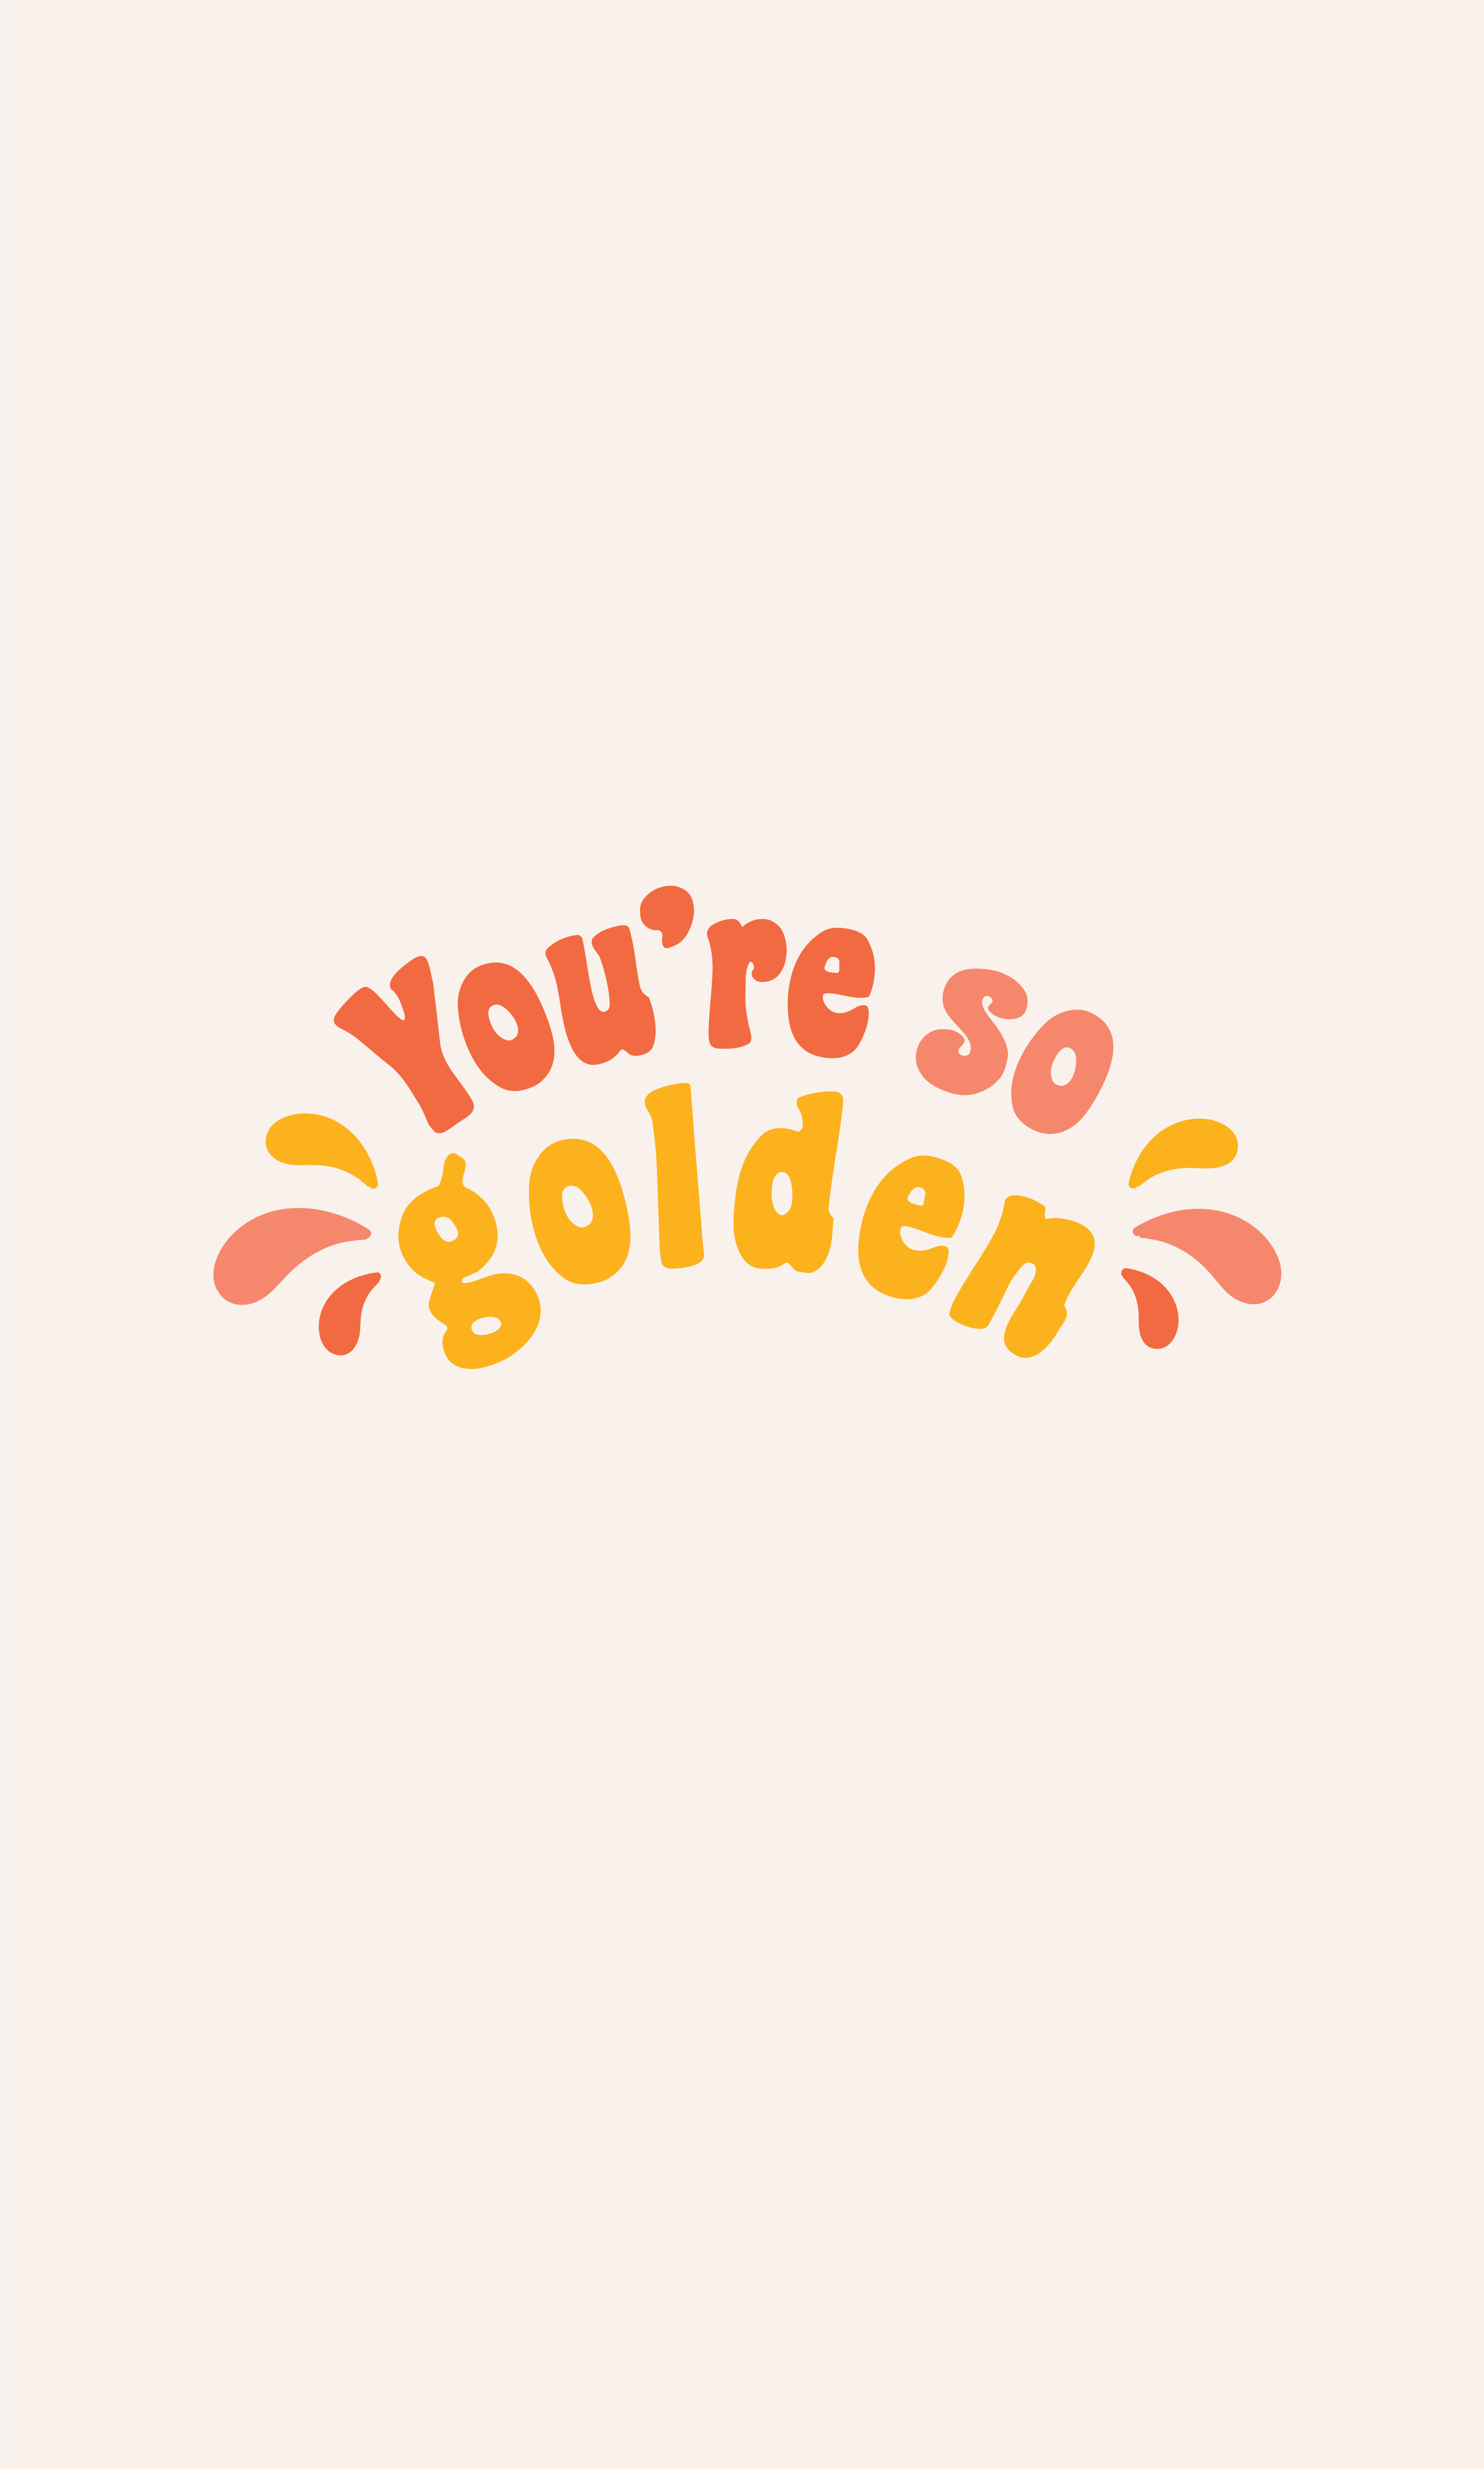 You're so golden.. Harry styles wallpaper, Wall collage, Picture collage wall